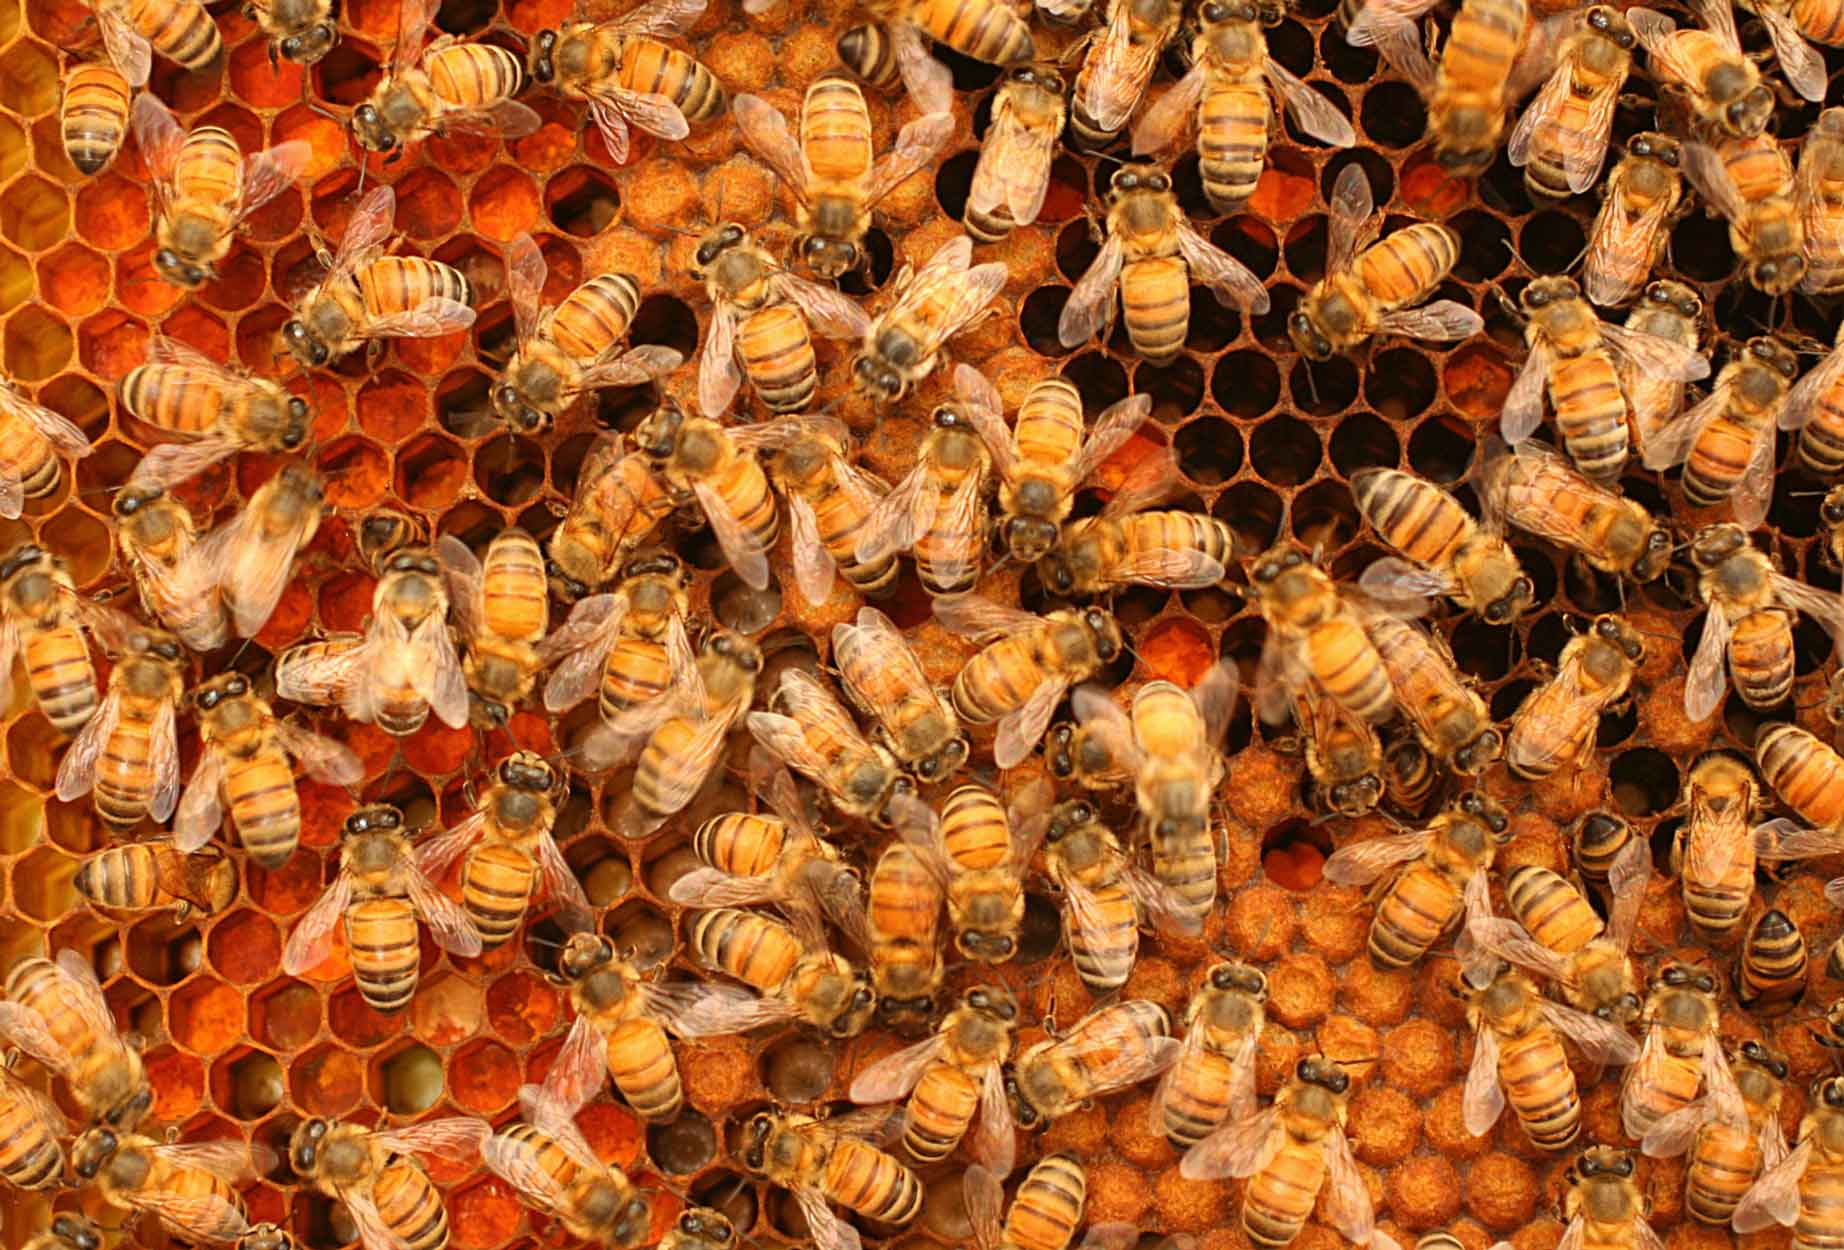 Multiple bees gathered at a honeycomb